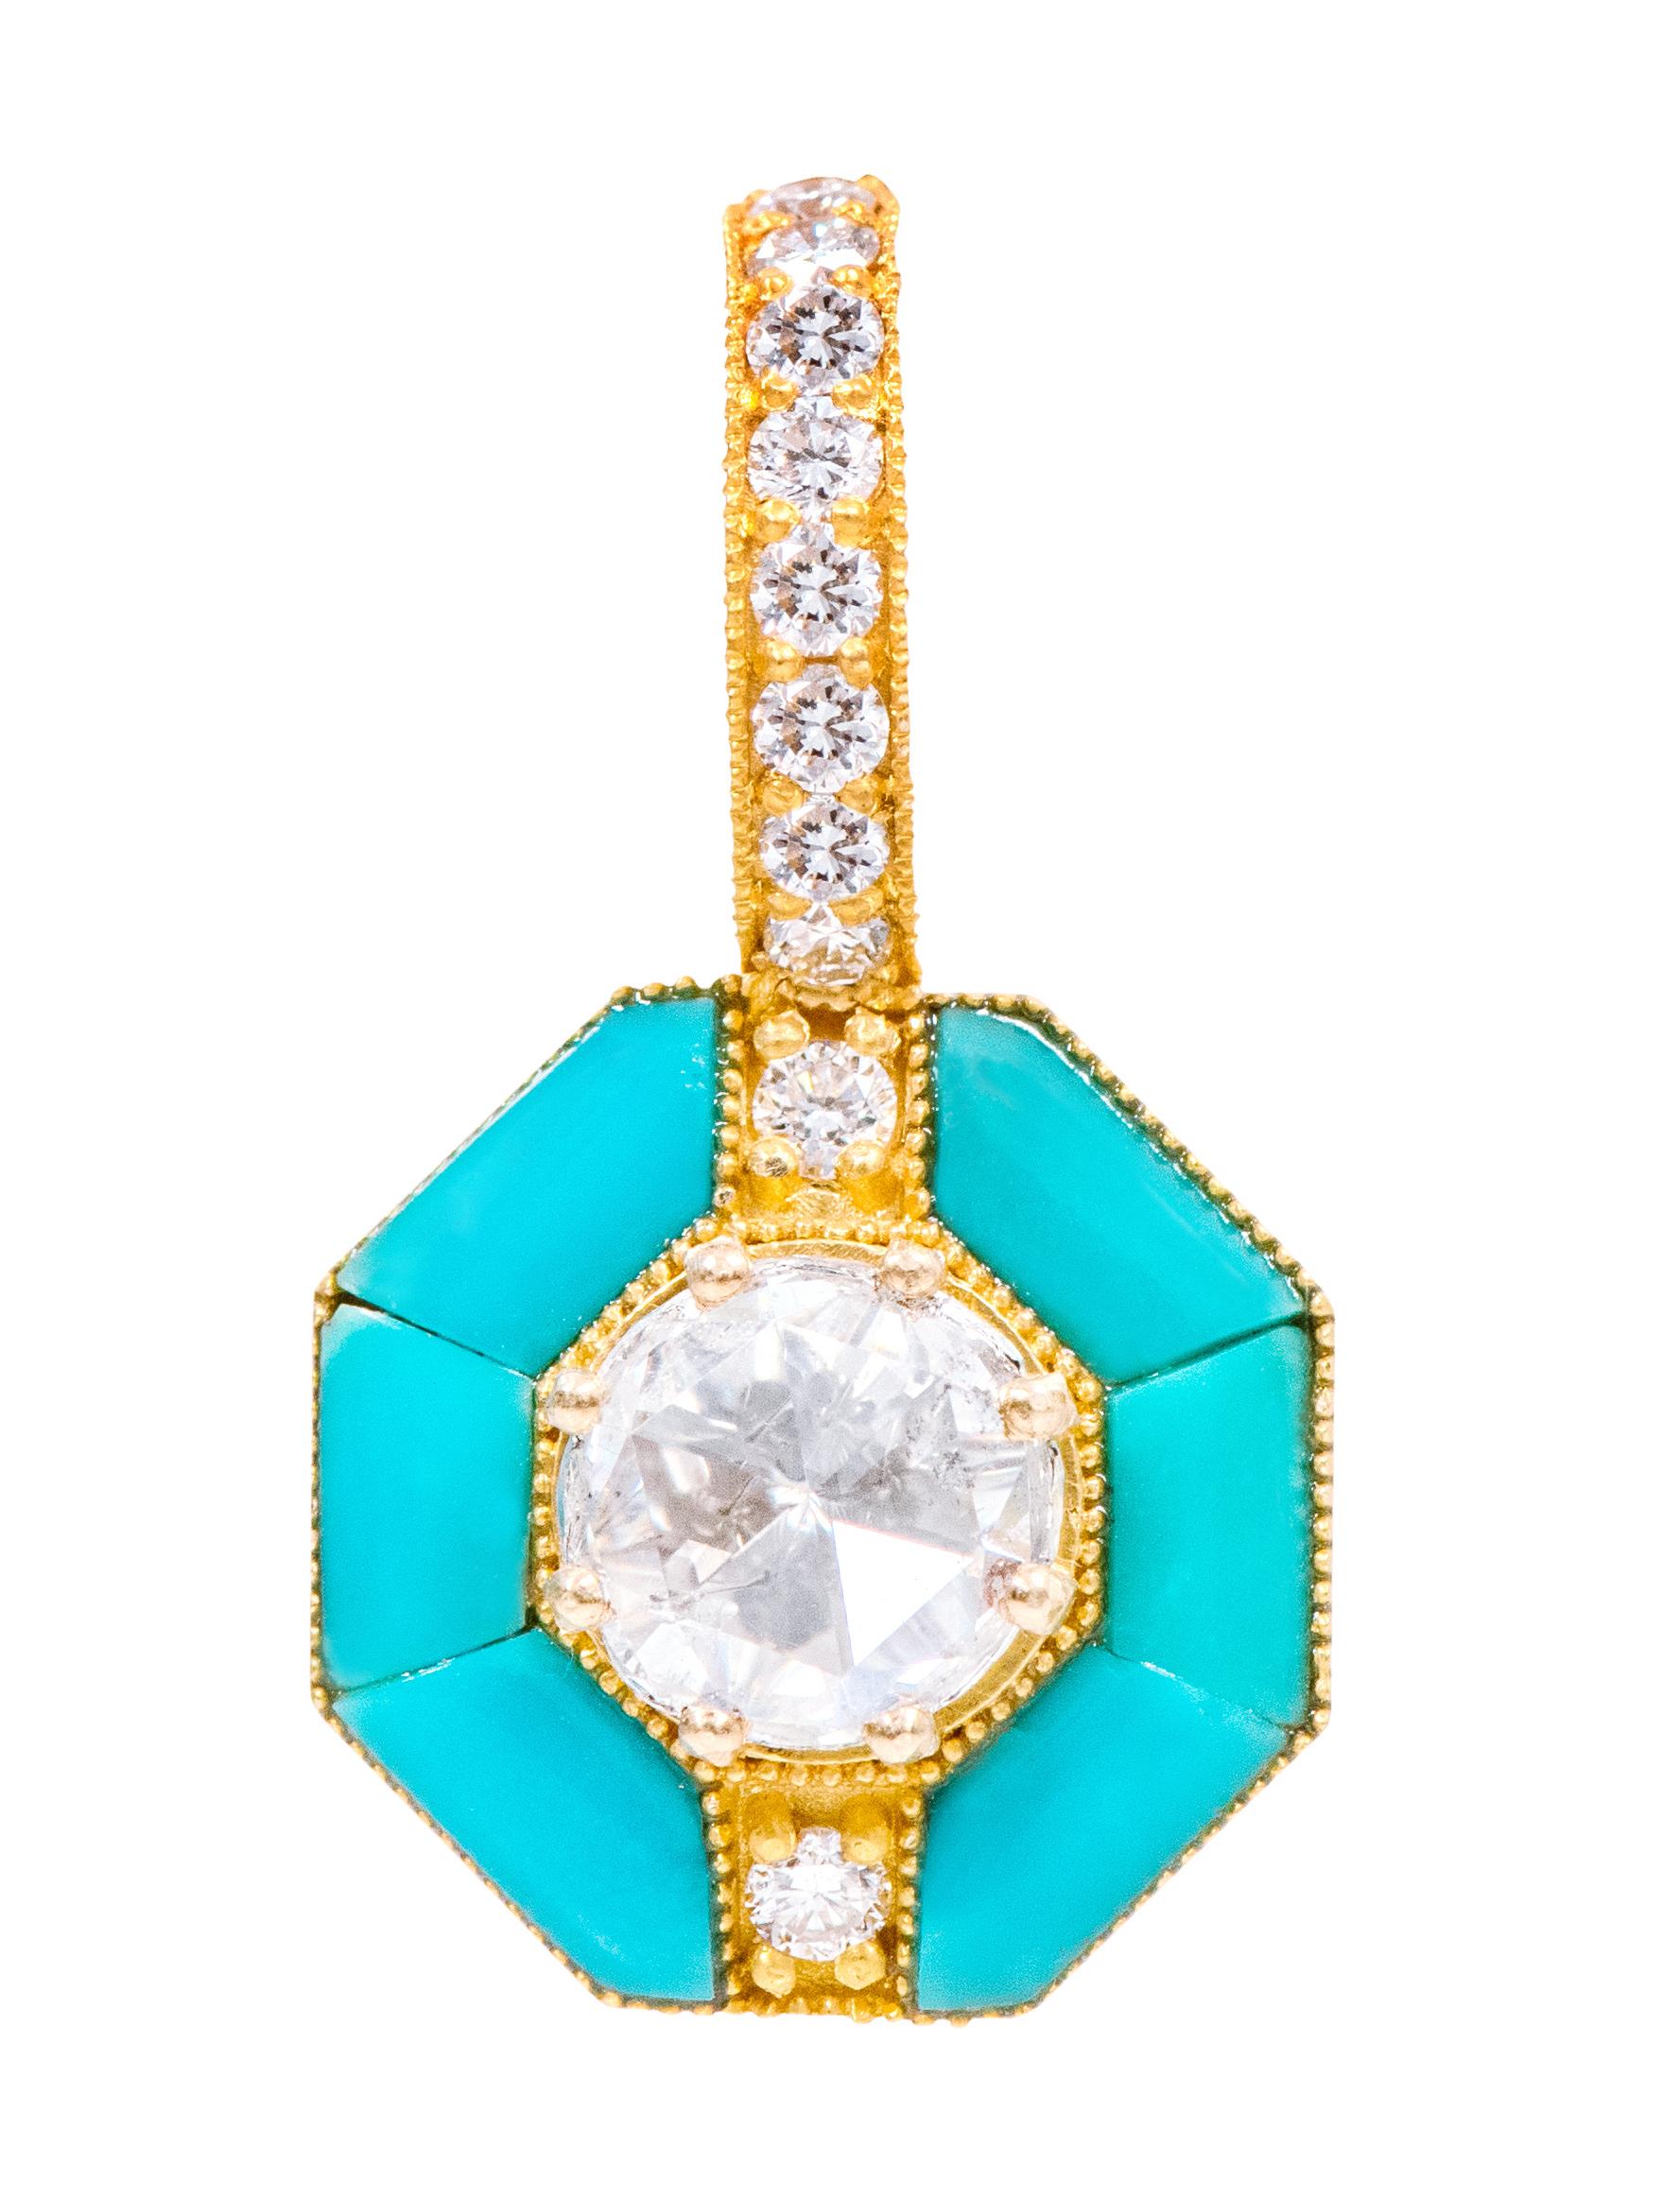 18 Karat Yellow Gold 3.55 Carat Solitaire Diamond and Turquoise Drop Earrings For Sale 1